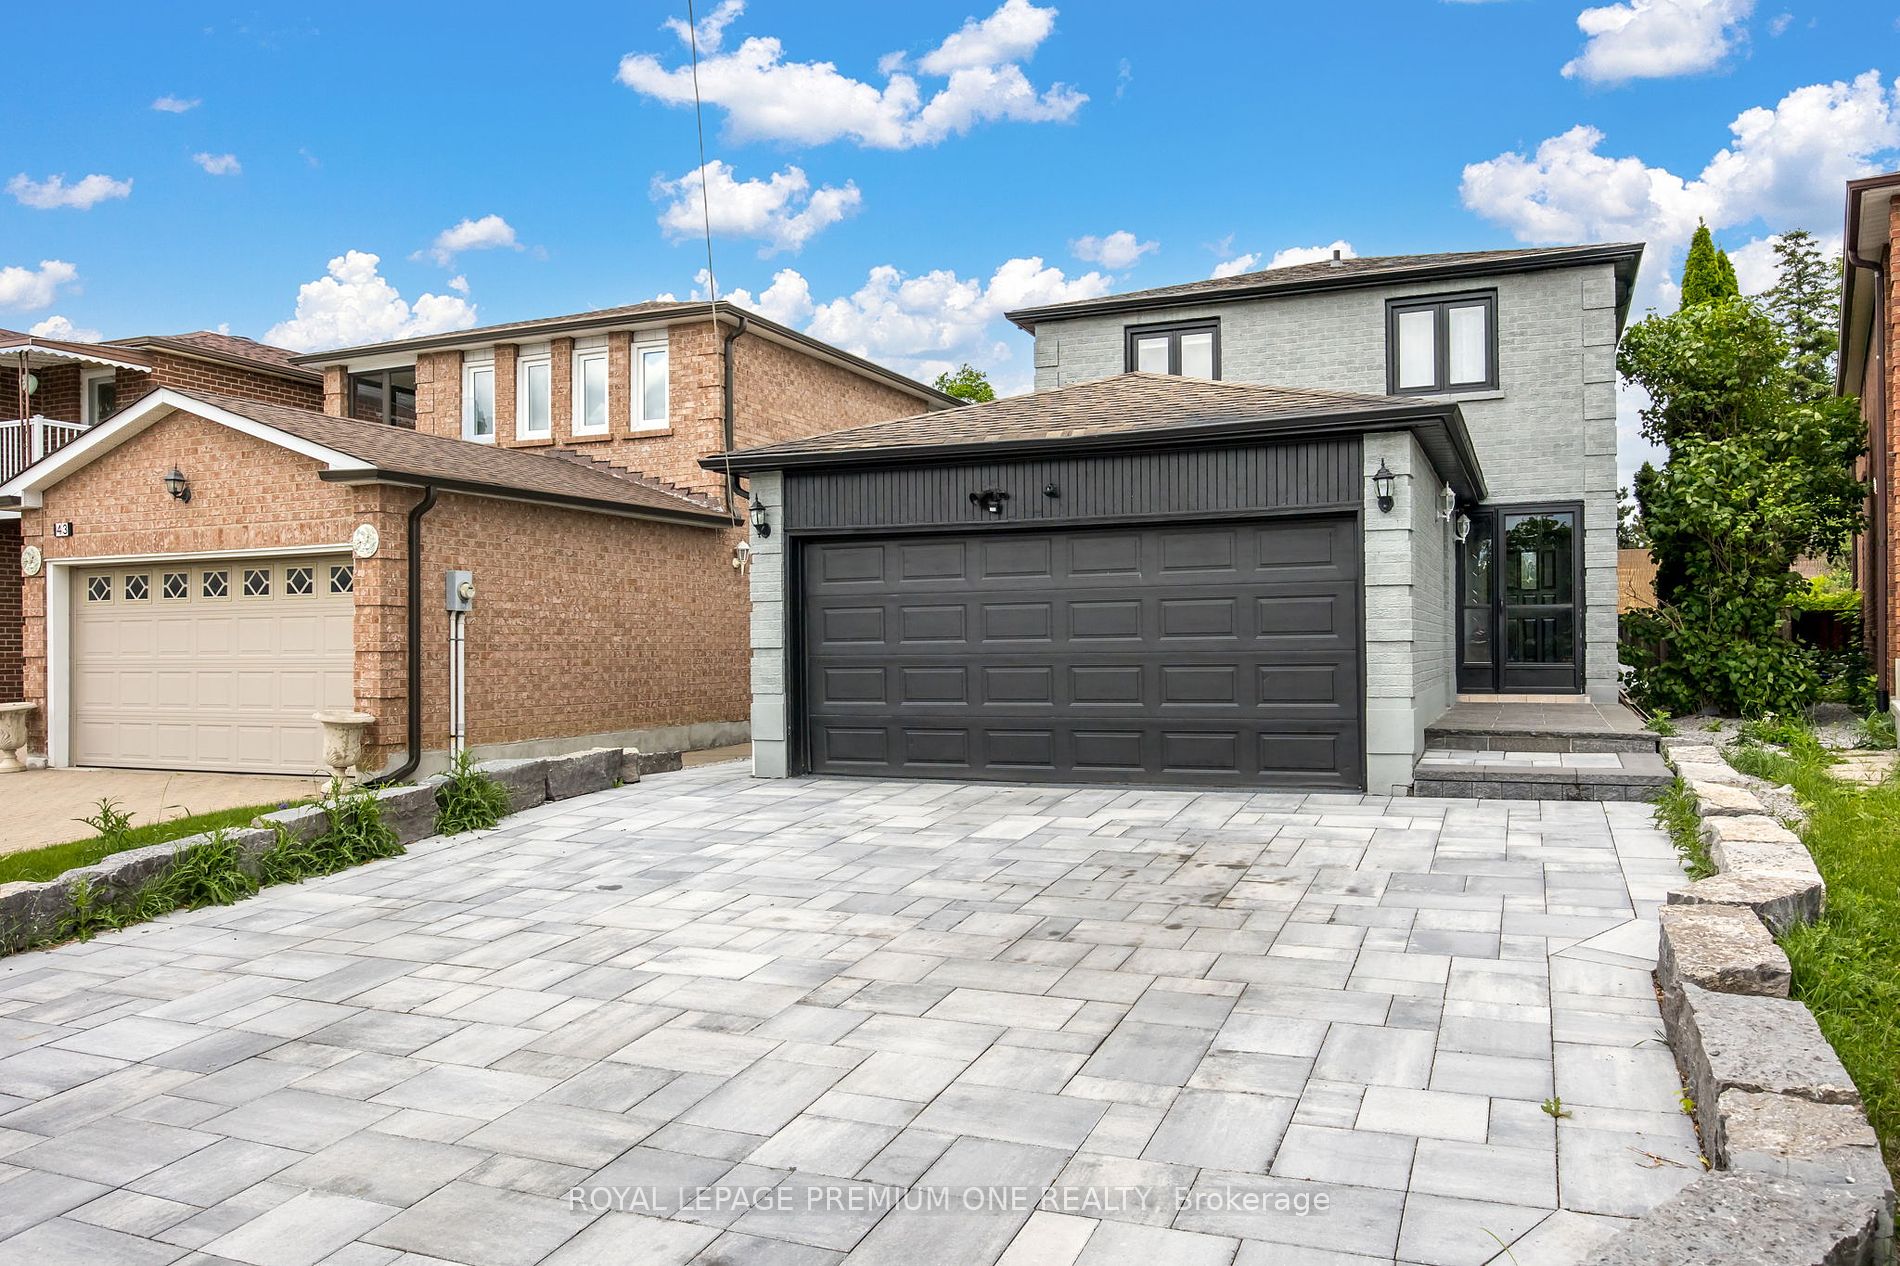 Detached house for sale at 47 Birch Meadow Otlk Vaughan Ontario